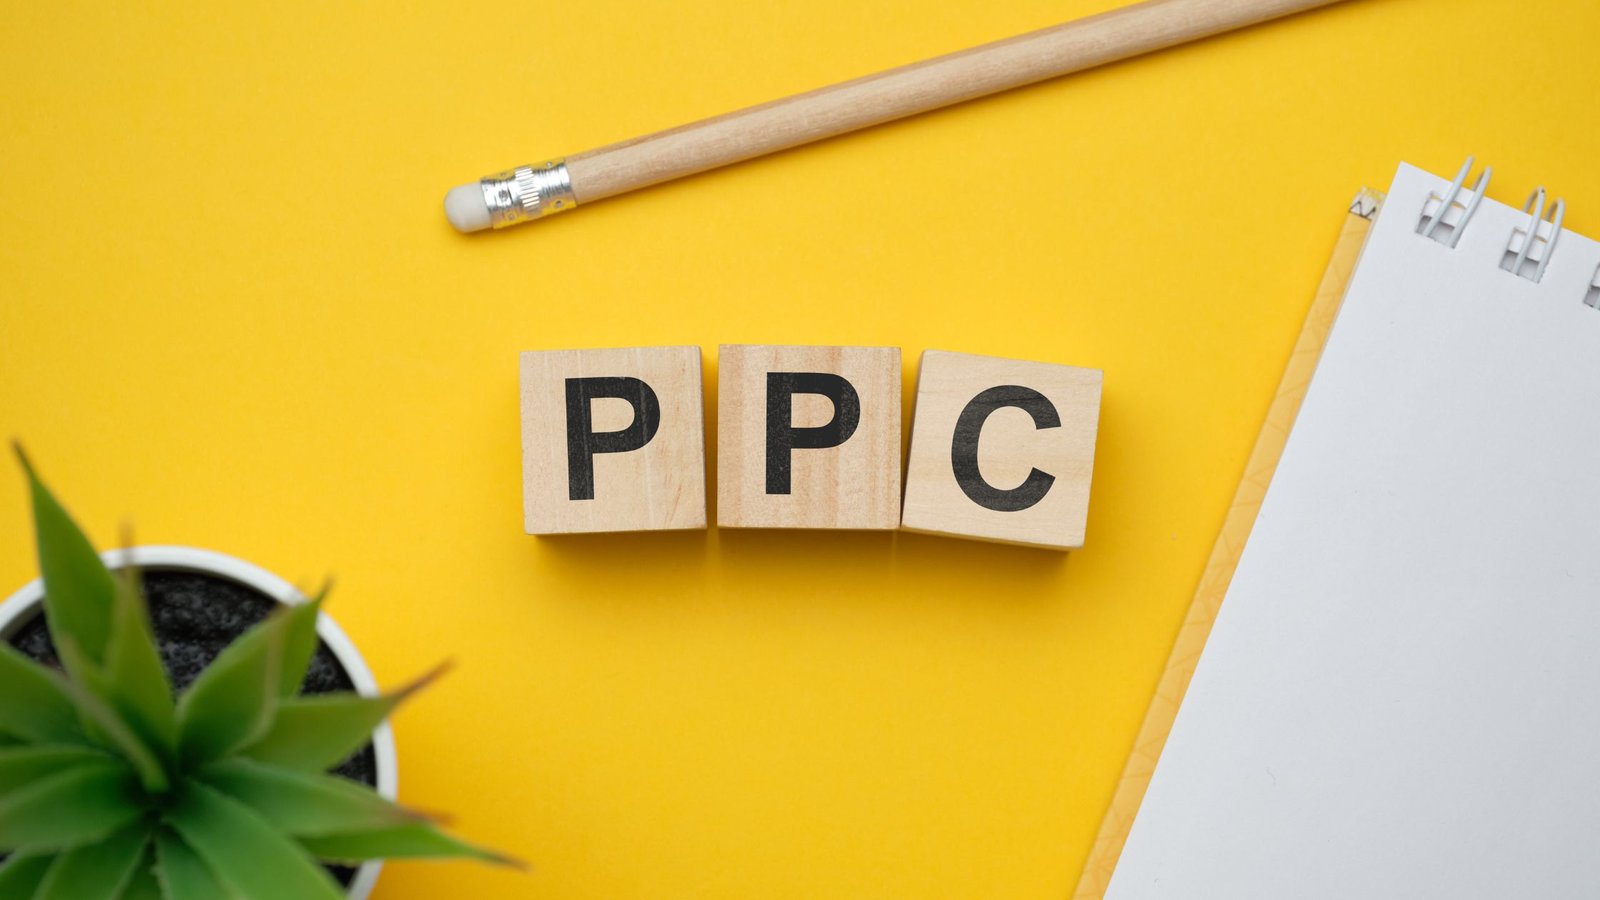 What Is PPC Marketing?